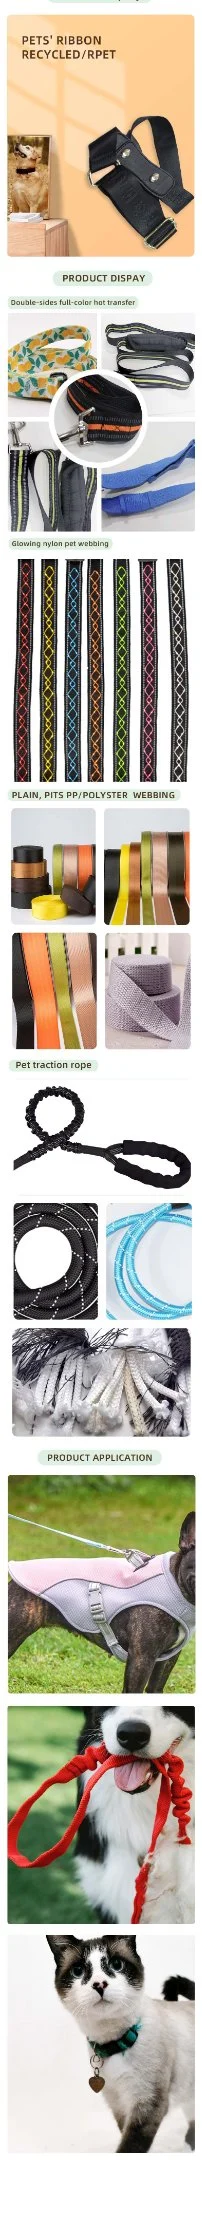 Reflective Strip Plastic Bottle RPET Polyester Webbing Can Be Jacquard Recycled Material Webbing for Pet Webbing Dog Leash High Elasticity Webbing